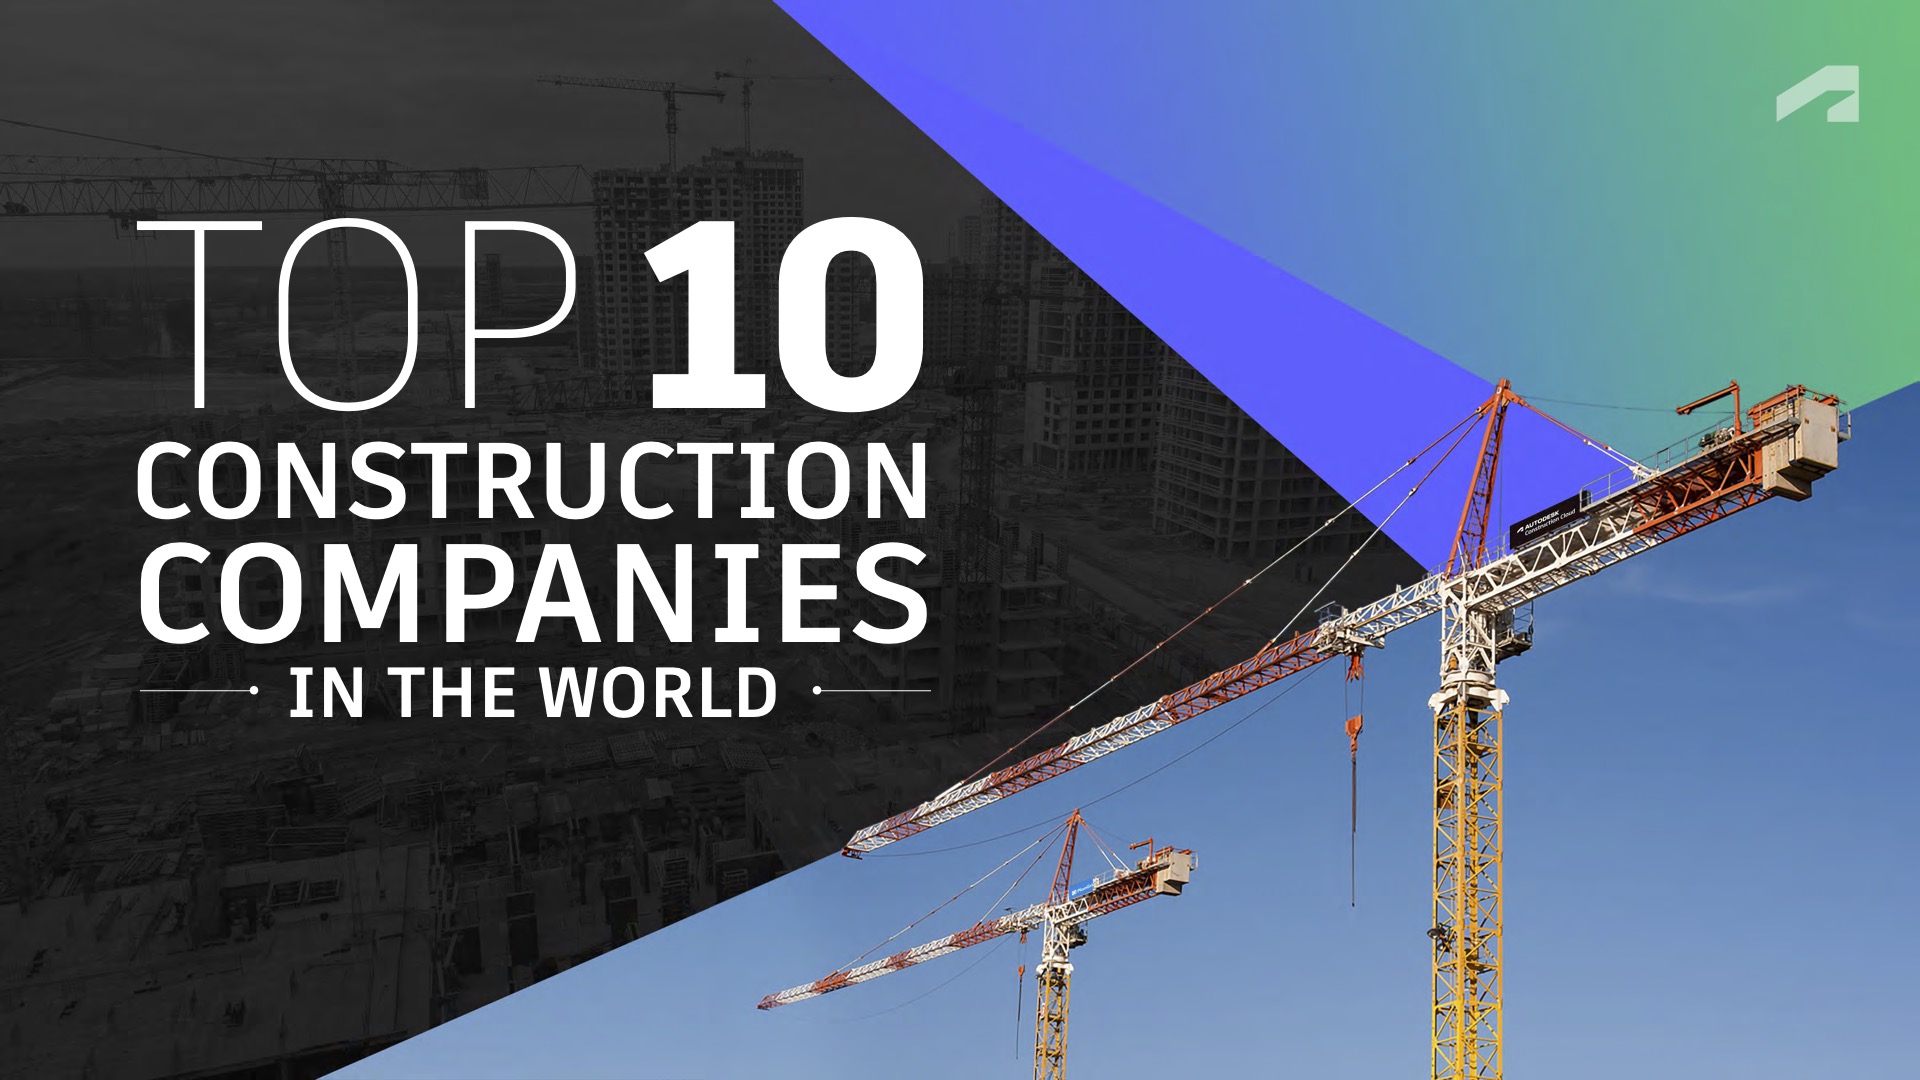 Top Construction Management Companies: Who's Leading the Industry and Why